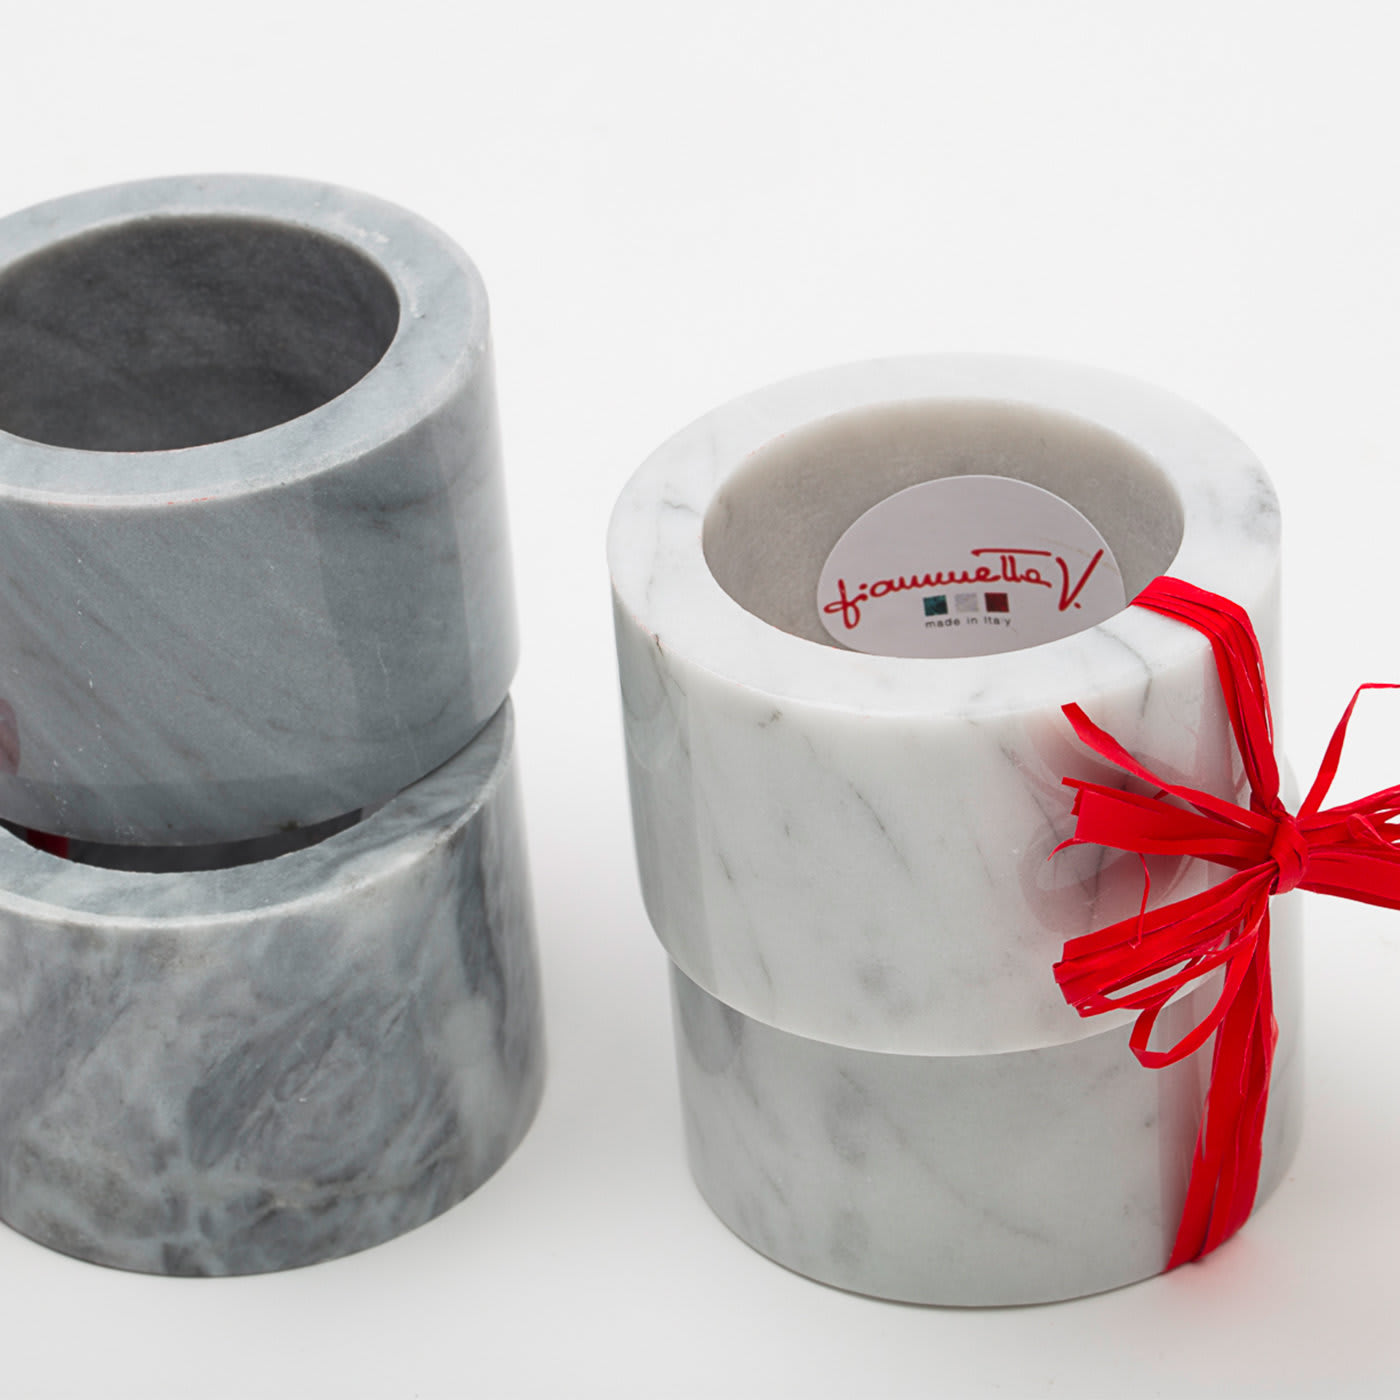 White and Black Marble Set of 4 Napkin Rings - FiammettaV Home Collection